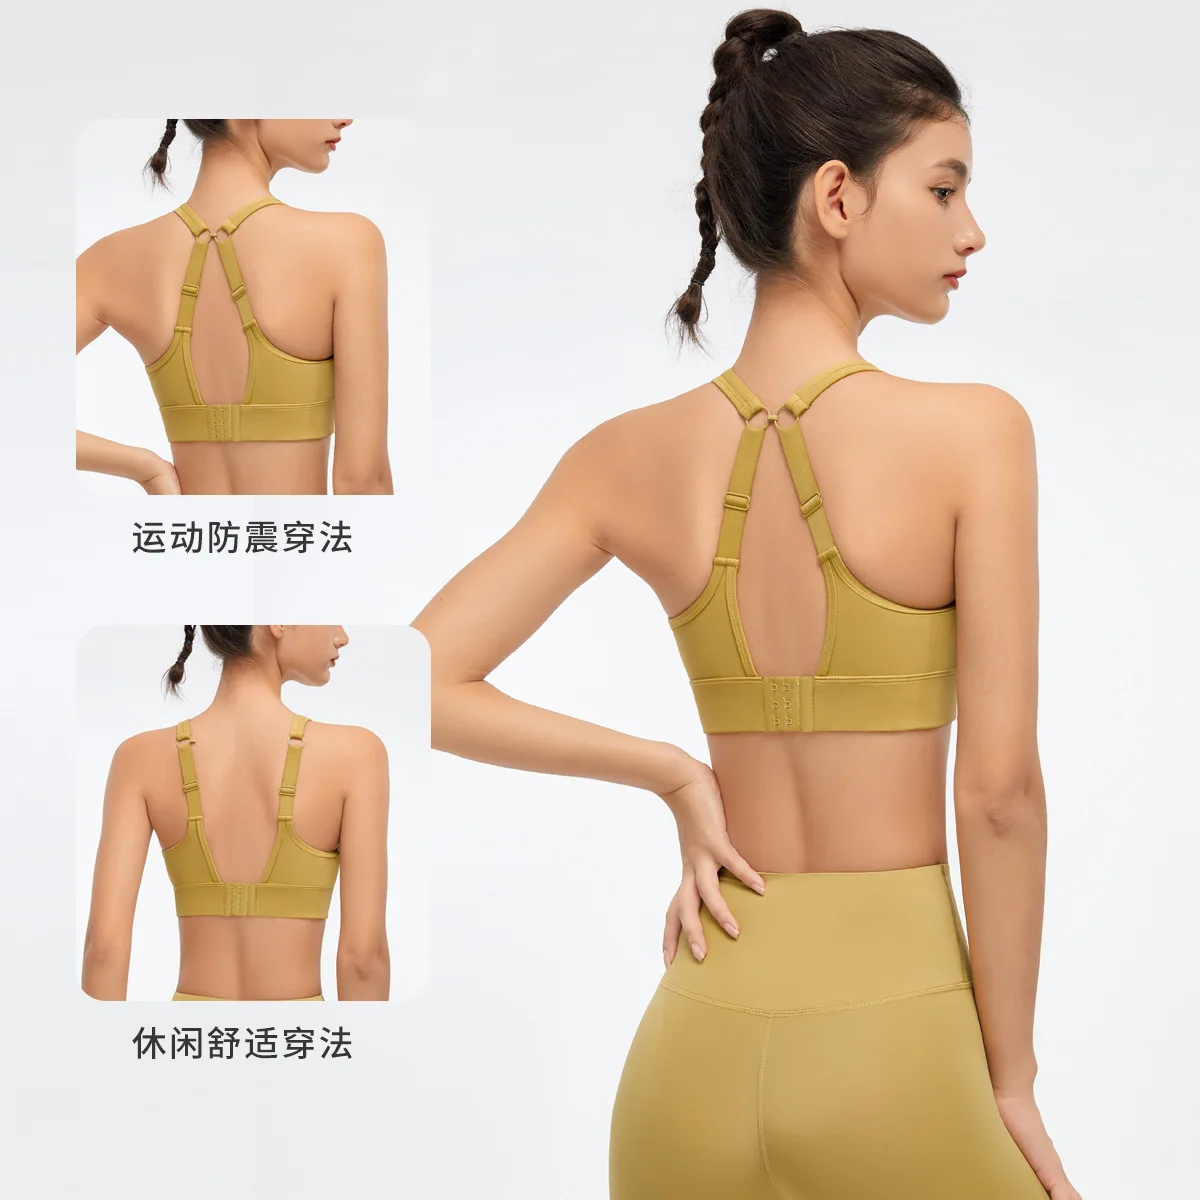 Shockproof sports underwear women gather stereotyped beautiful back running vest bra outer wear outdoor fitness yoga clothes